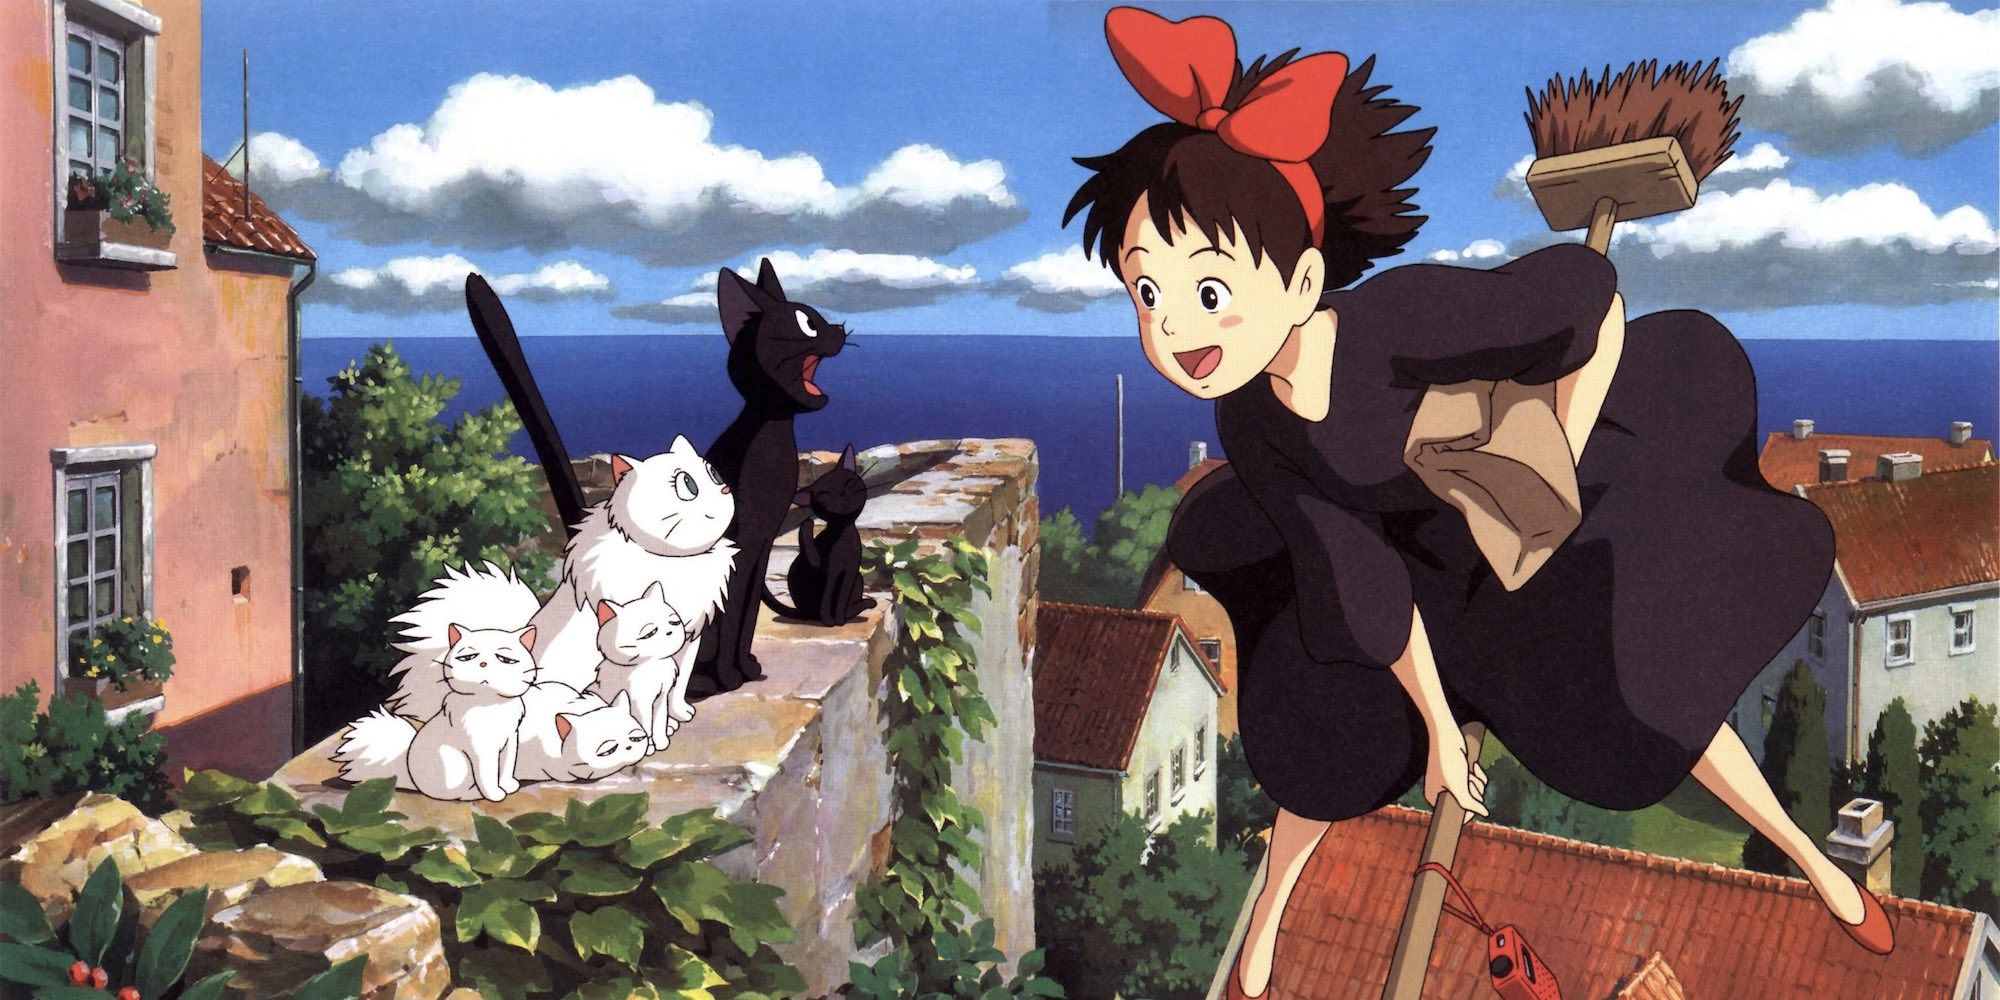 Disney Changed Kiki's Delivery Service Without Permission From Studio Ghibli